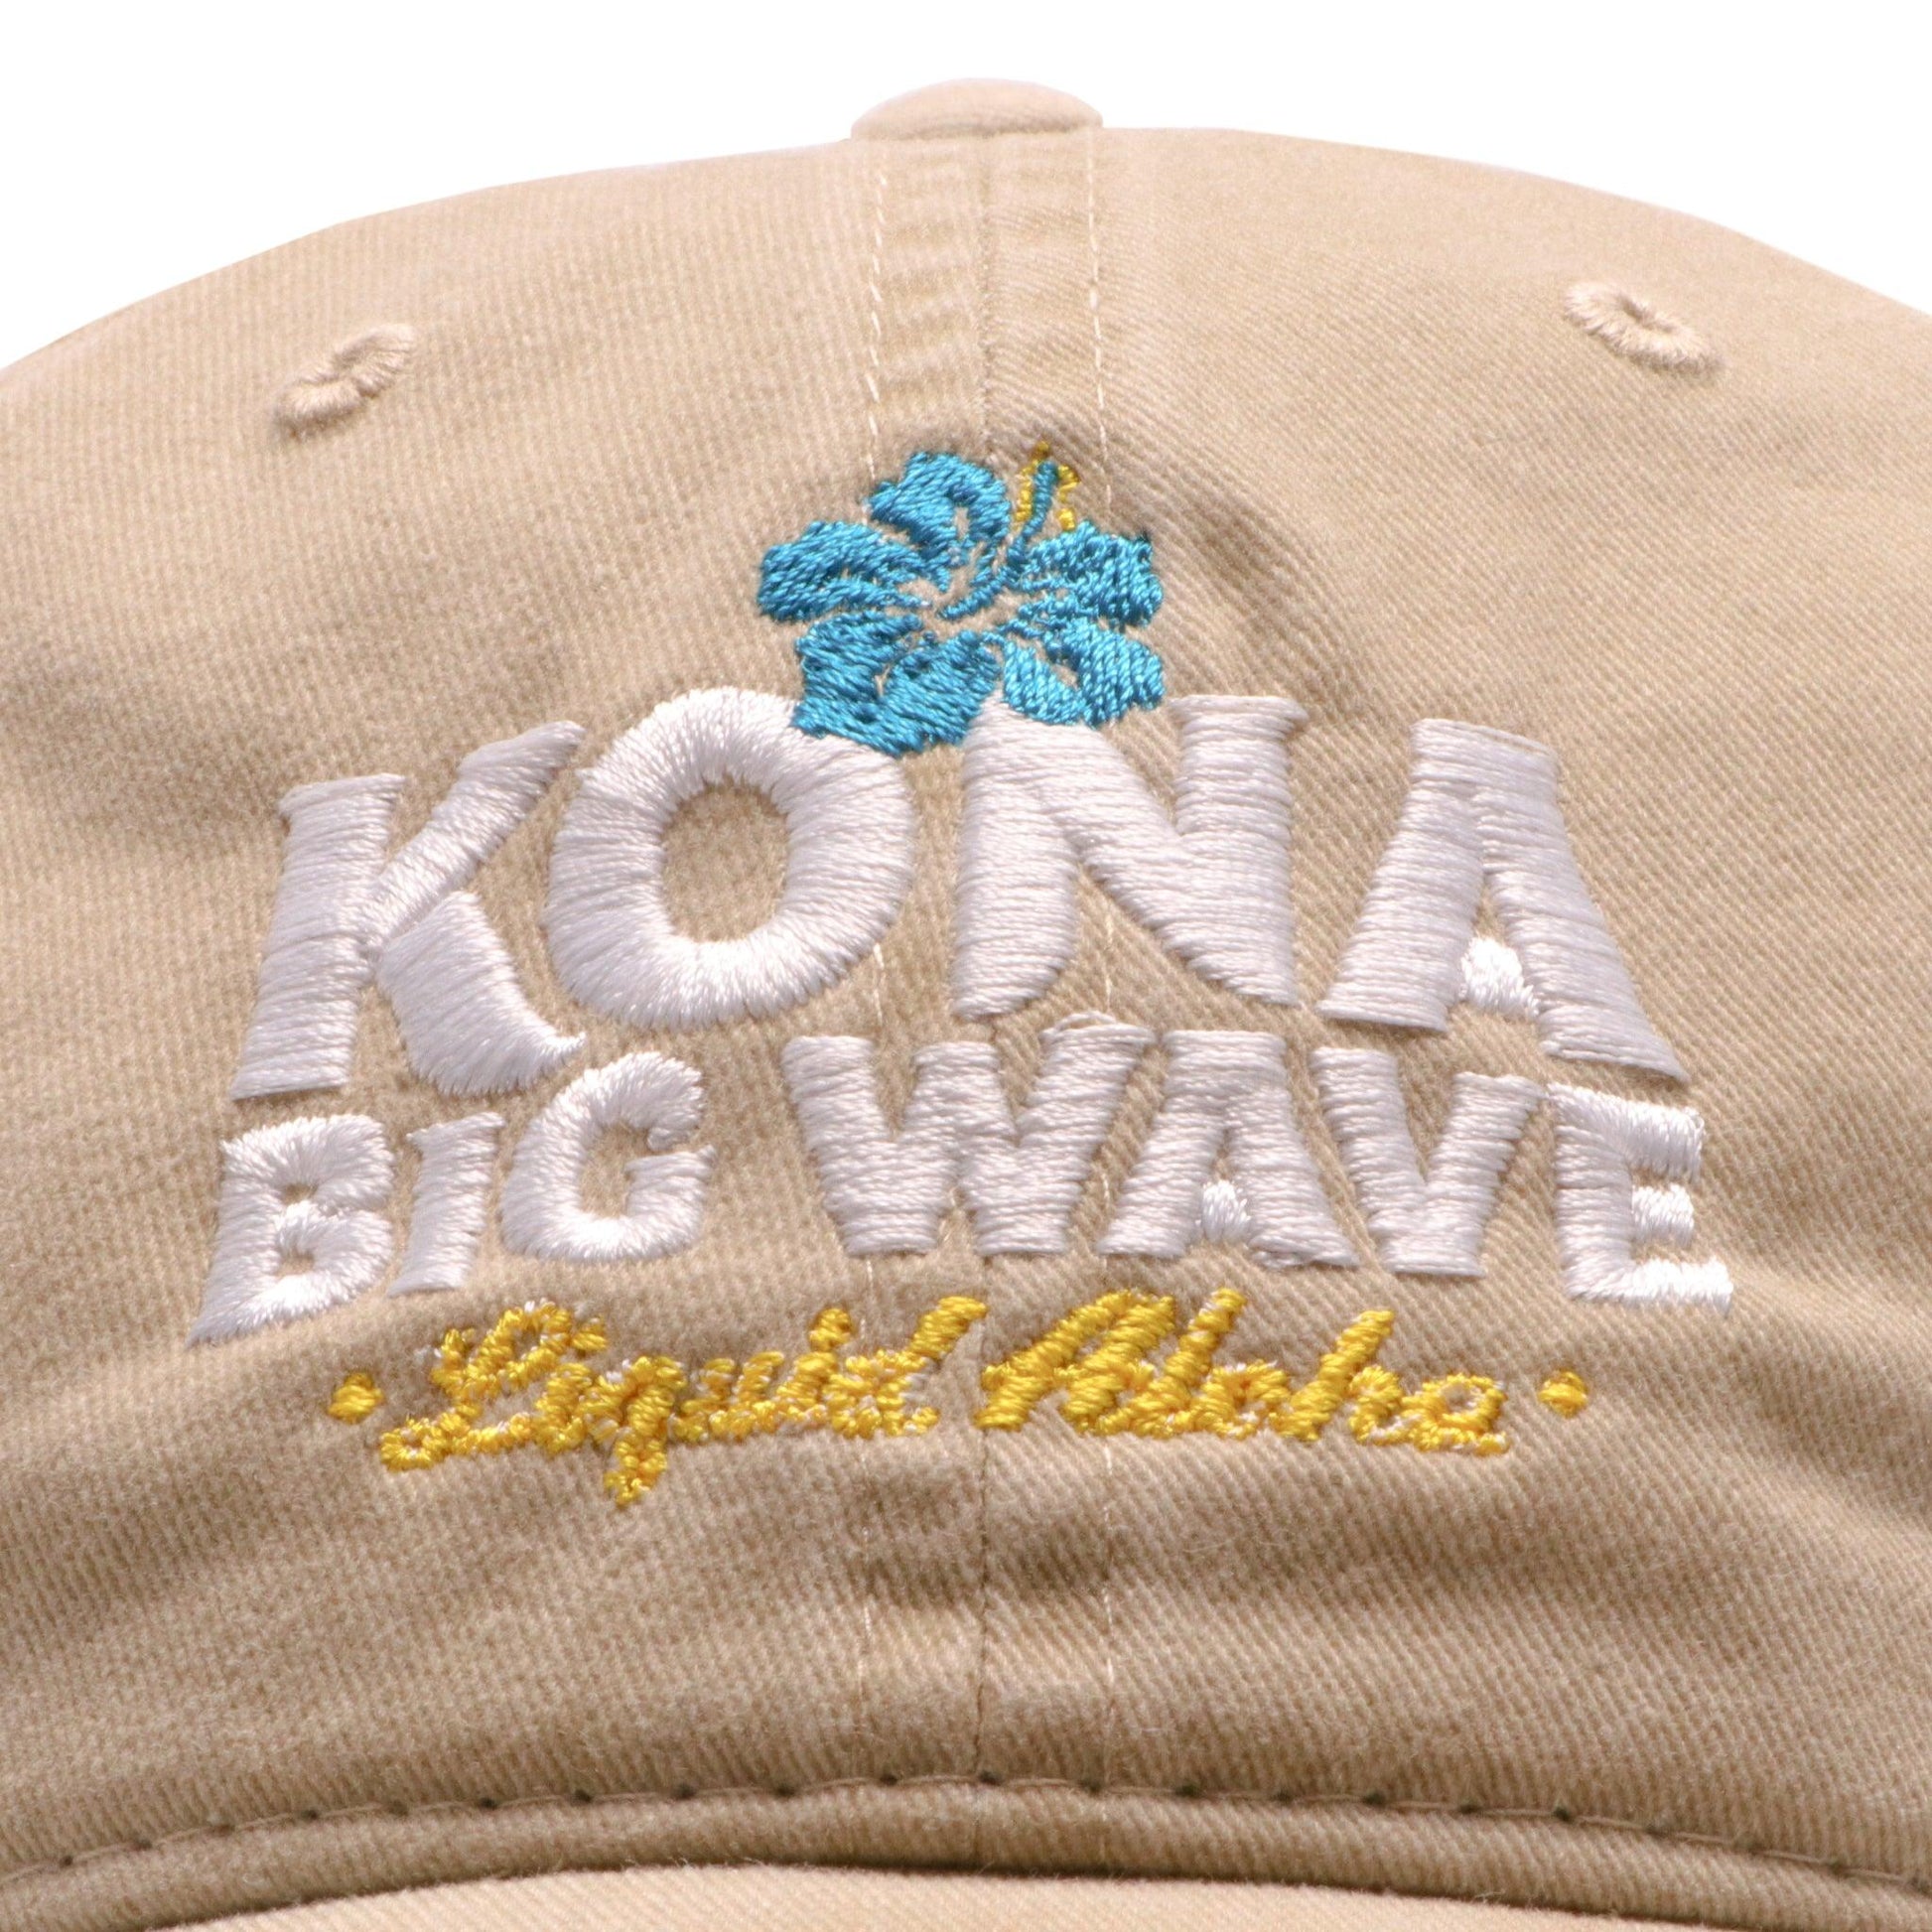 close up of front hat logo. Embroidered Kona Big wave in white with Liquid aloha in yellow below with blue hibiscus flower